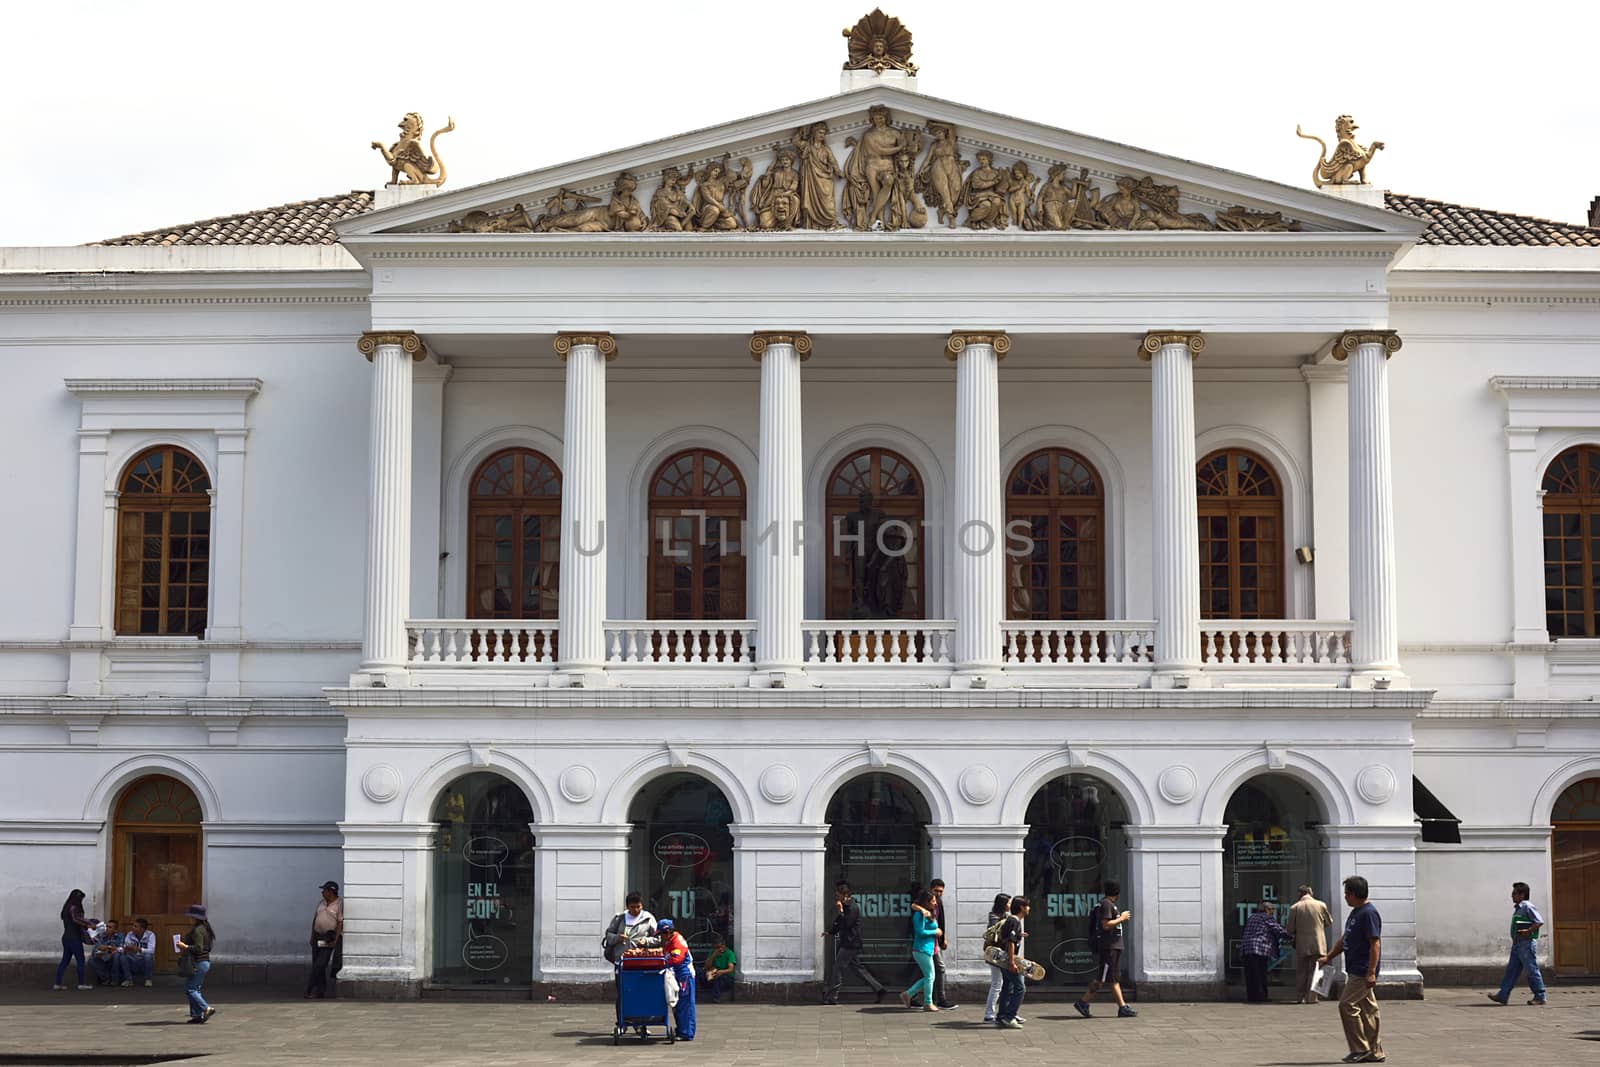 QUITO, ECUADOR - AUGUST 4, 2014: Unidentified people walking in front of the Teatro Nacional Sucre (Sucre National Theater) on Plaza del Teatro in the historic city center on August 4, 2014 in Quito, Ecuador. Quito is an UNESCO World Cultural Heritage Site. 